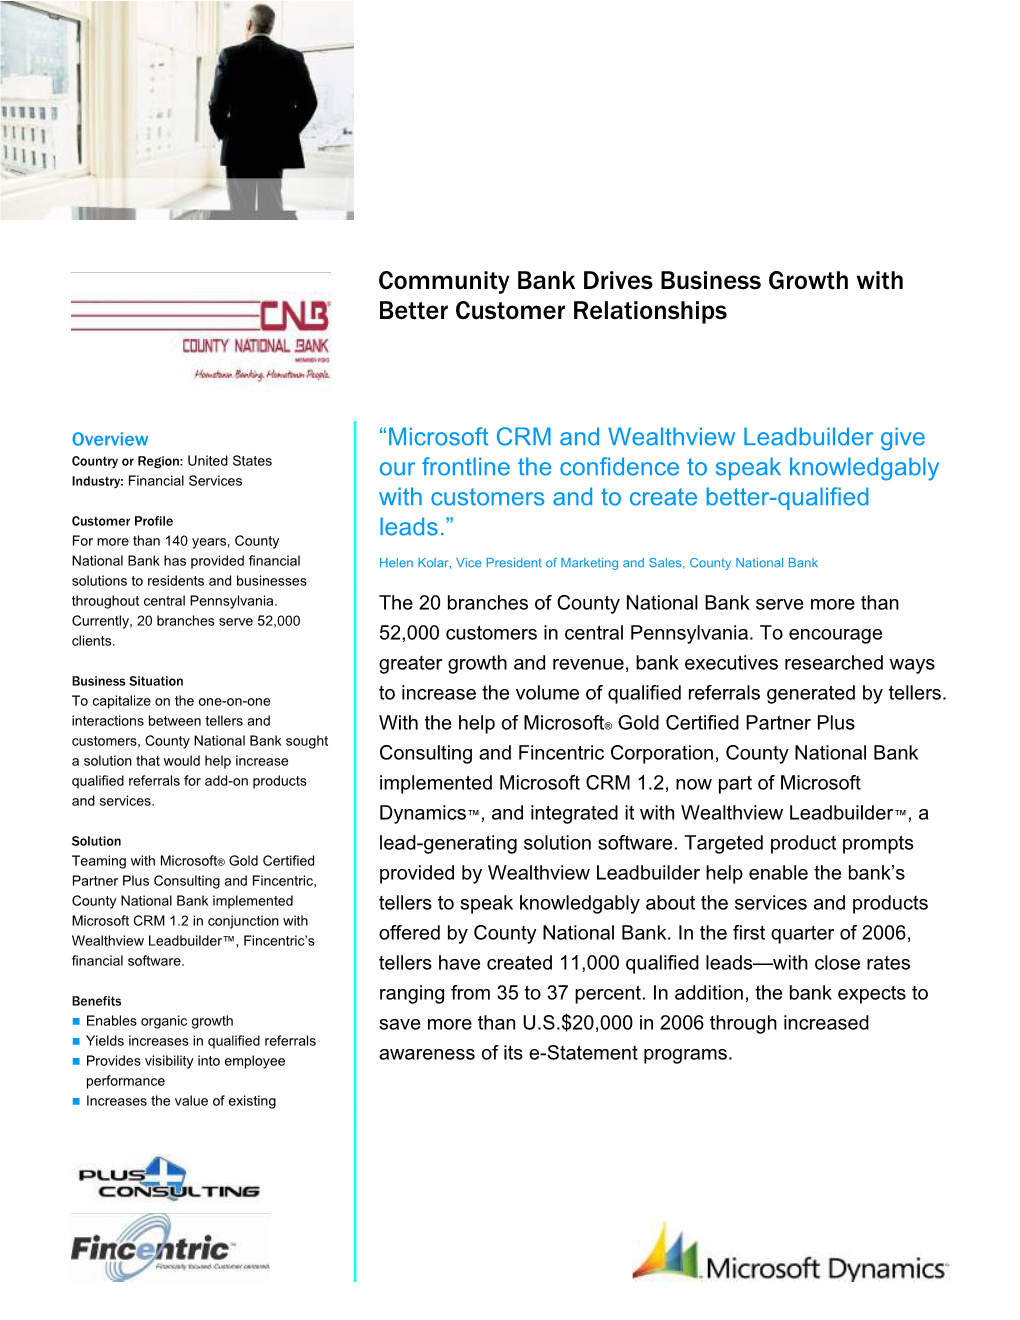 Community Bank Drives Business Growth with Better Customer Relationships